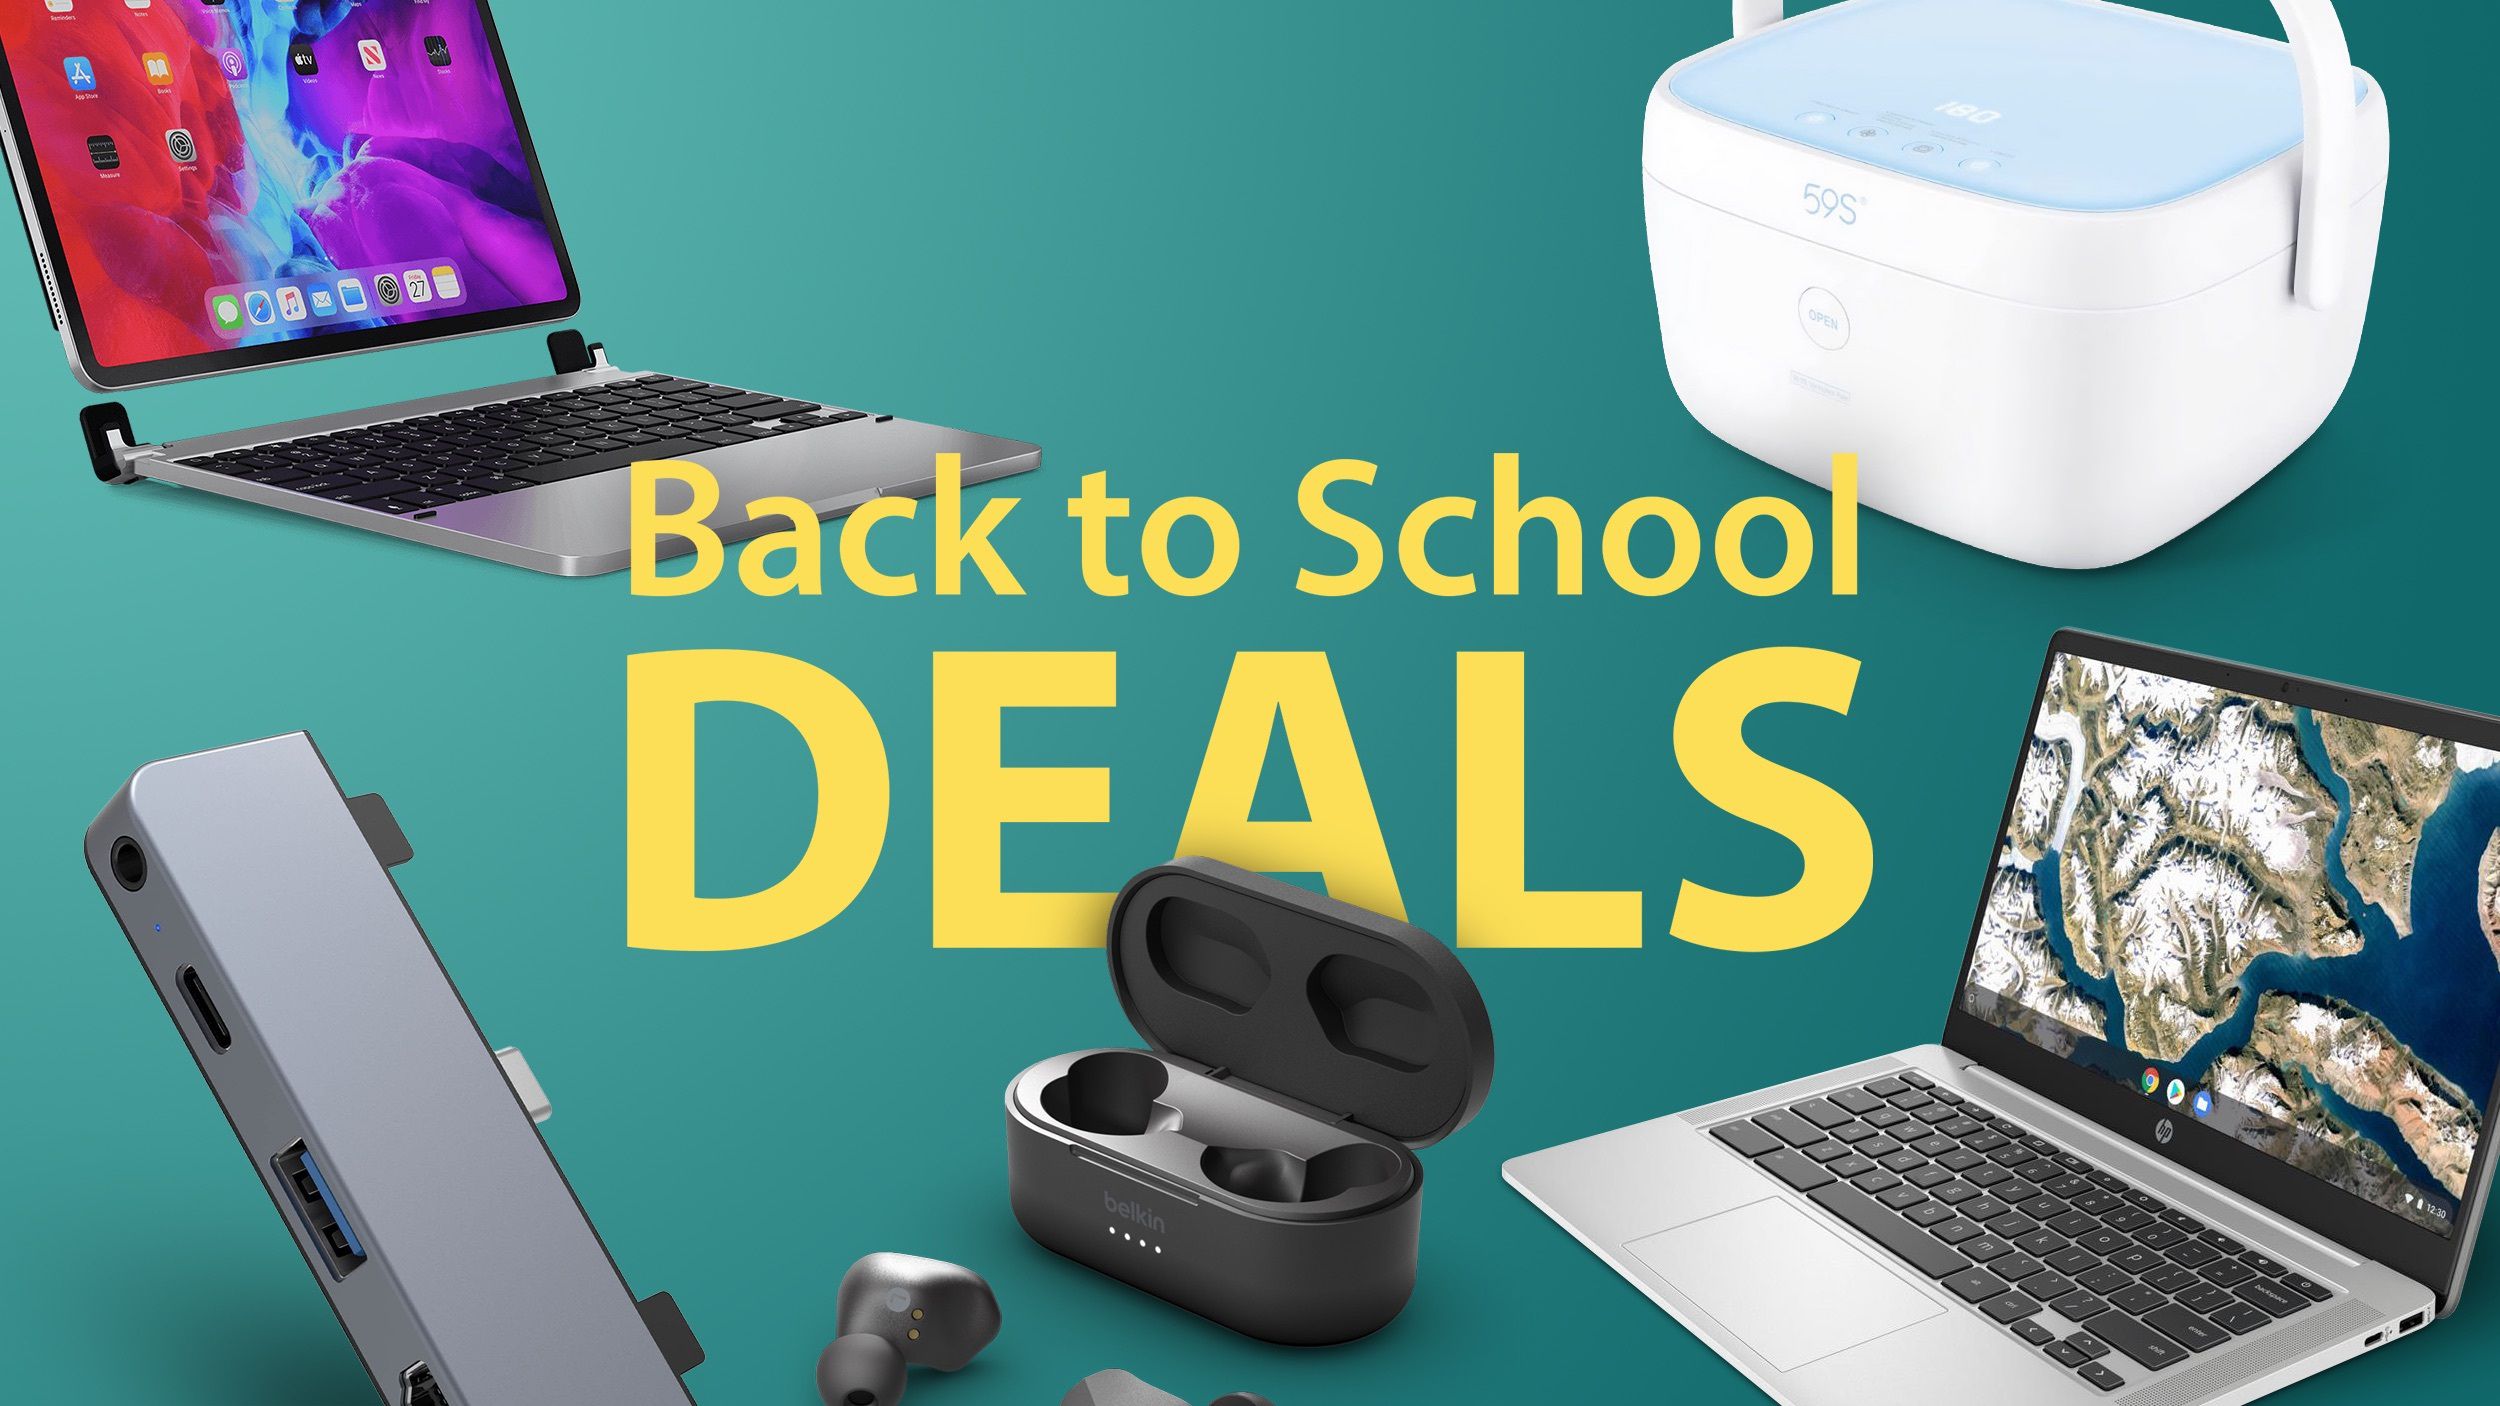 Deals: Shop the Best Tech-Related Back To School Sales From Twelve South, Nimble, Nomad, and More